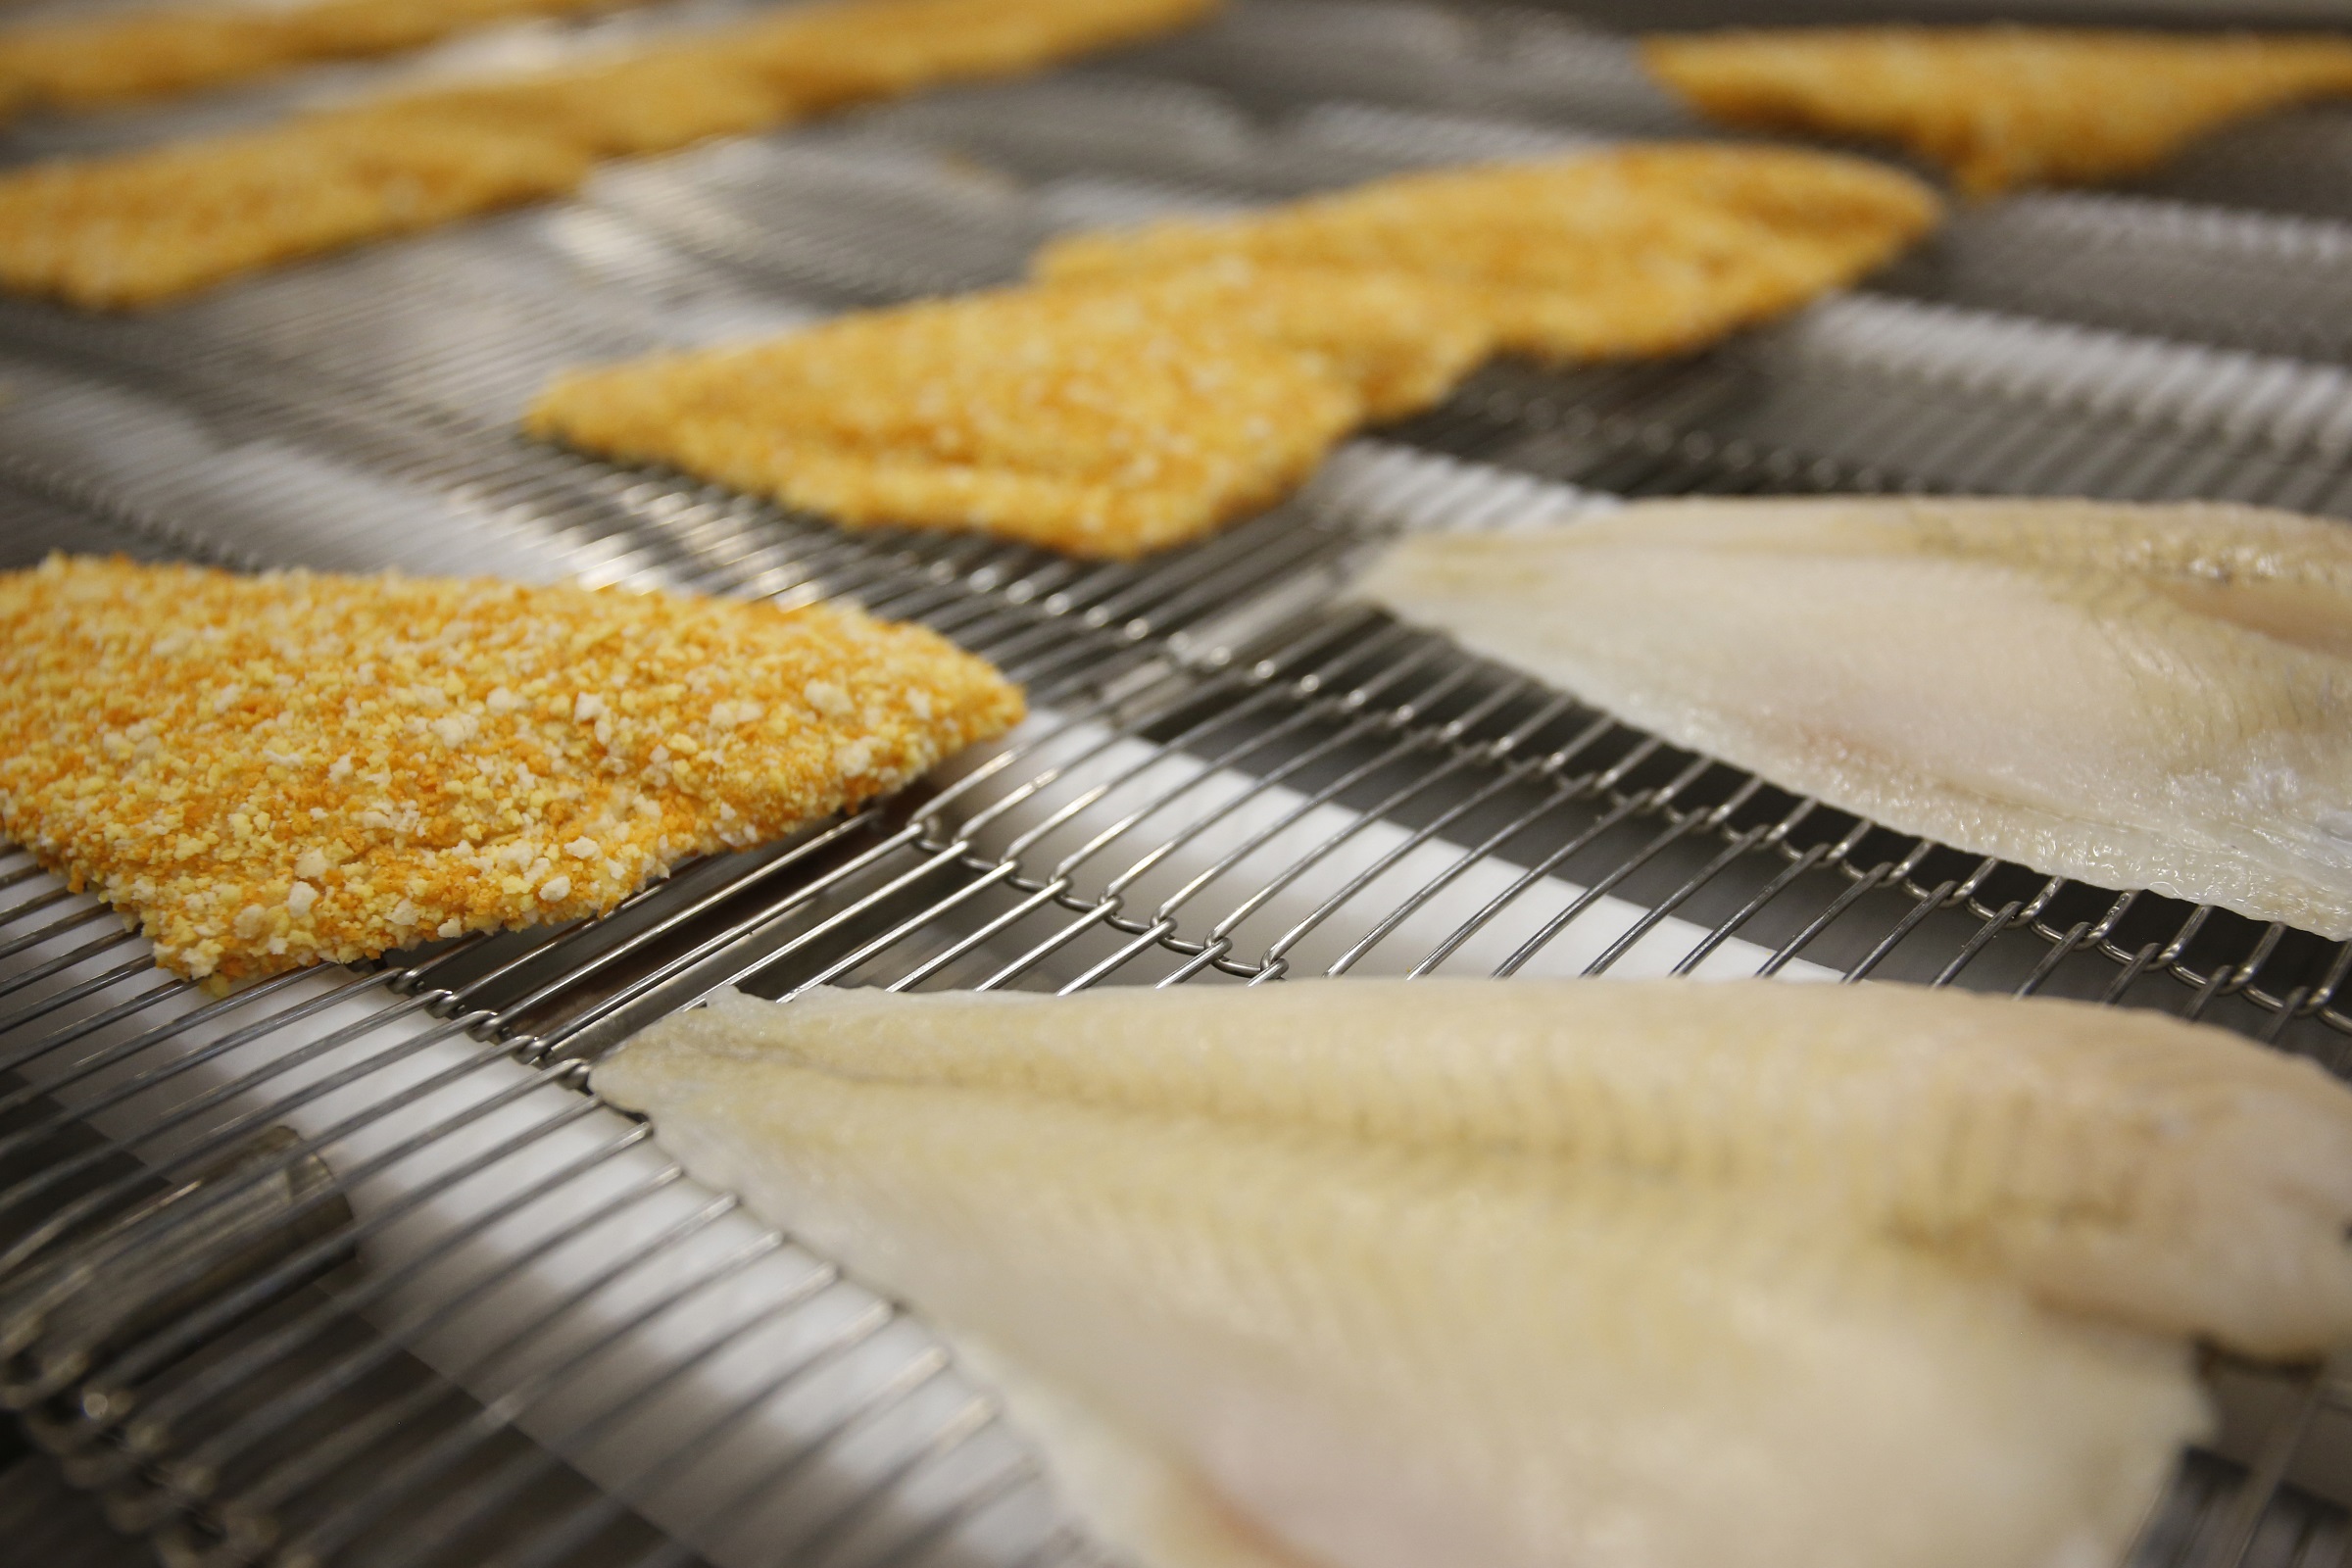 Coated whitefish fillets